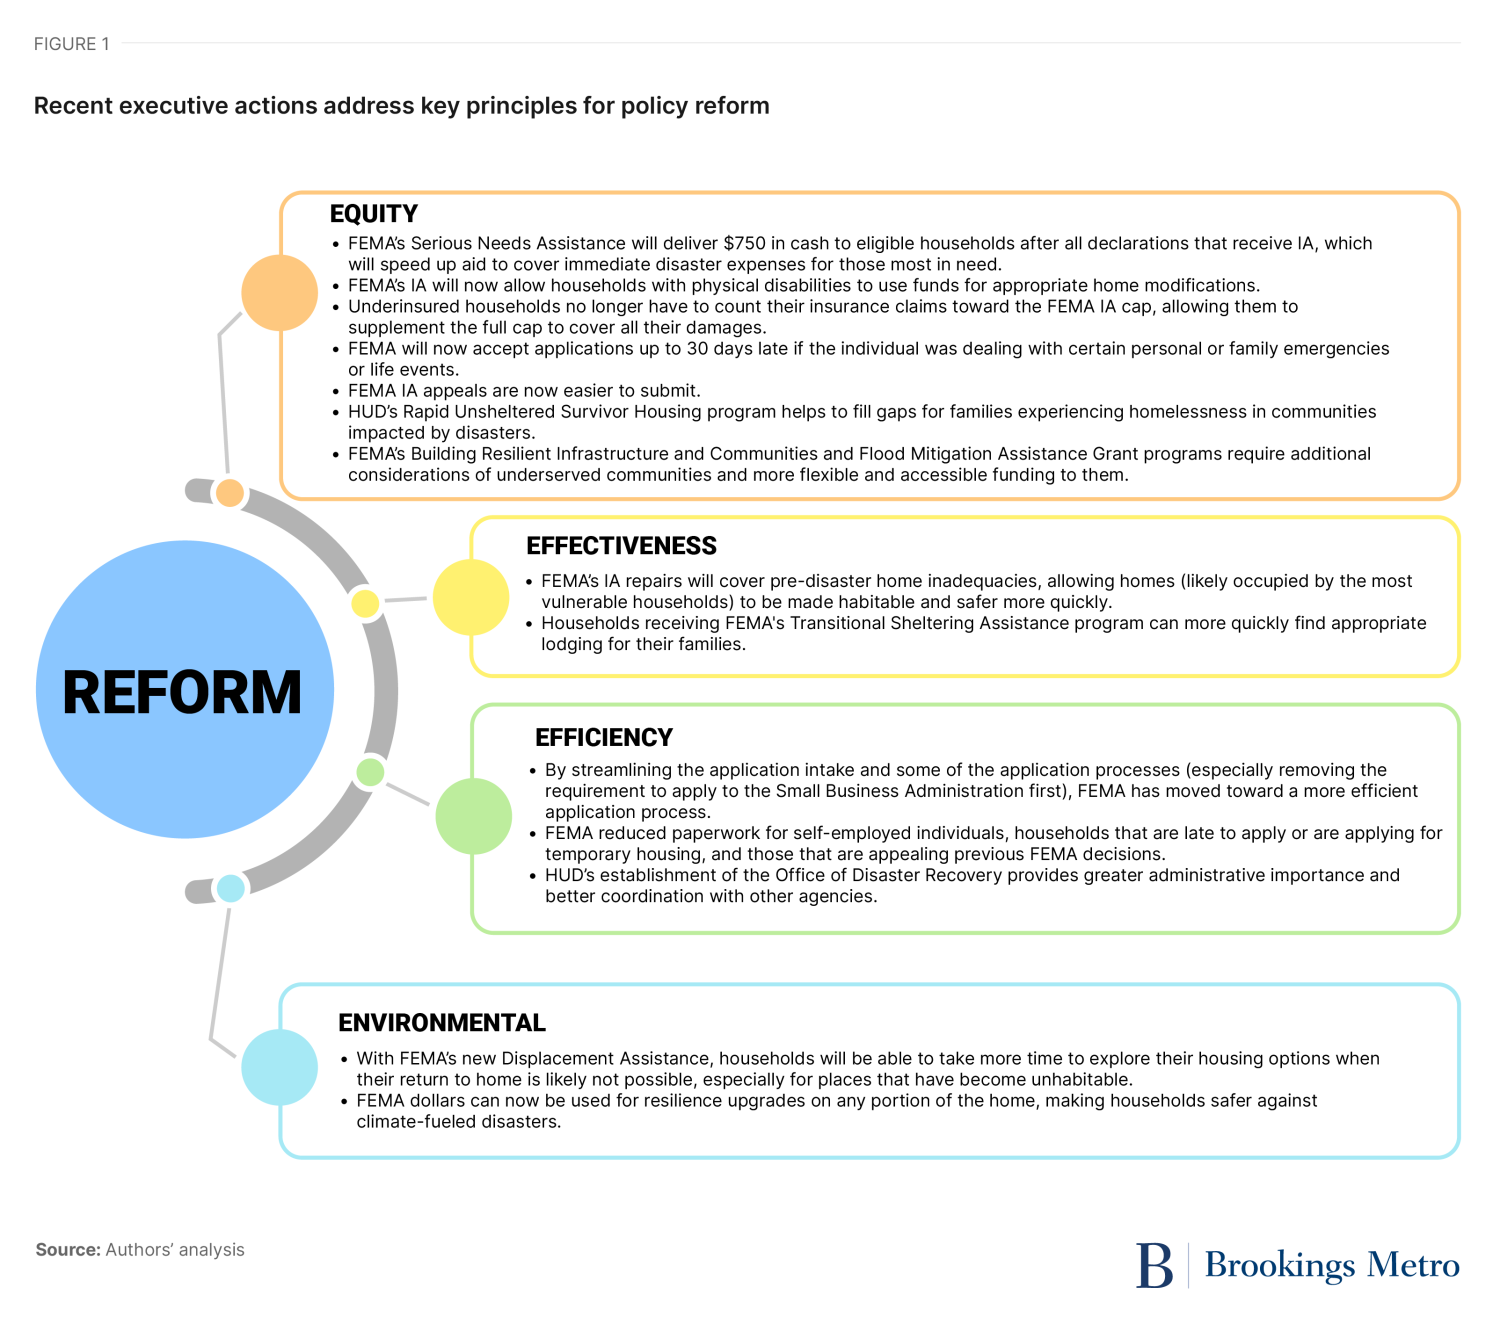 Figure 1. Recent executive actions address key principles for policy reform